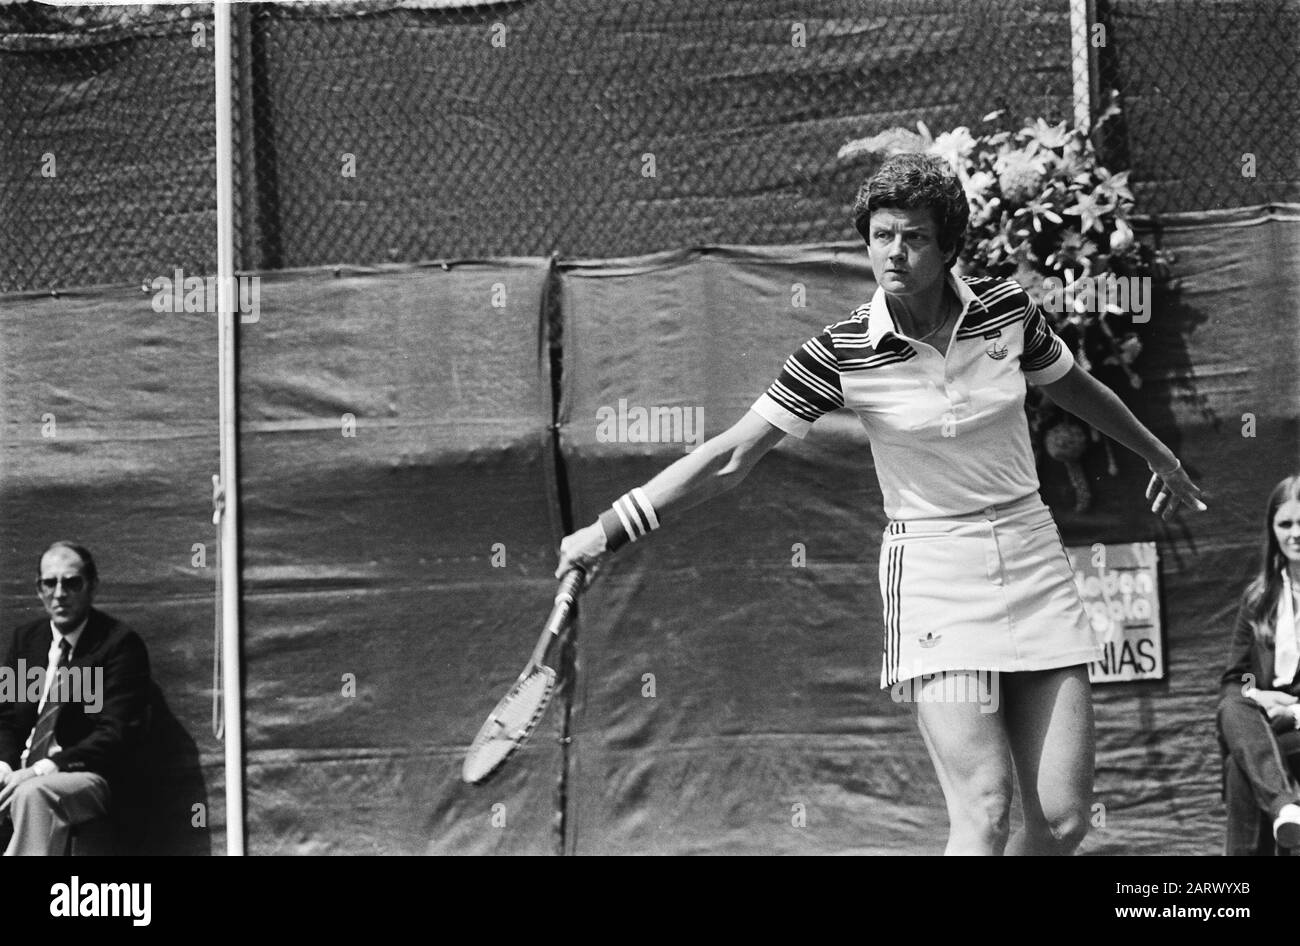 Tennis: Netherlands versus United States in The Hague; nr. 14: Navratilova in action, nr. 11, 12, 13: Betty Stove in action Date: 6 July 1980 Location: The Hague, Zuid-Holland Keywords: tennis Personal name: Betty Stove Stock Photo